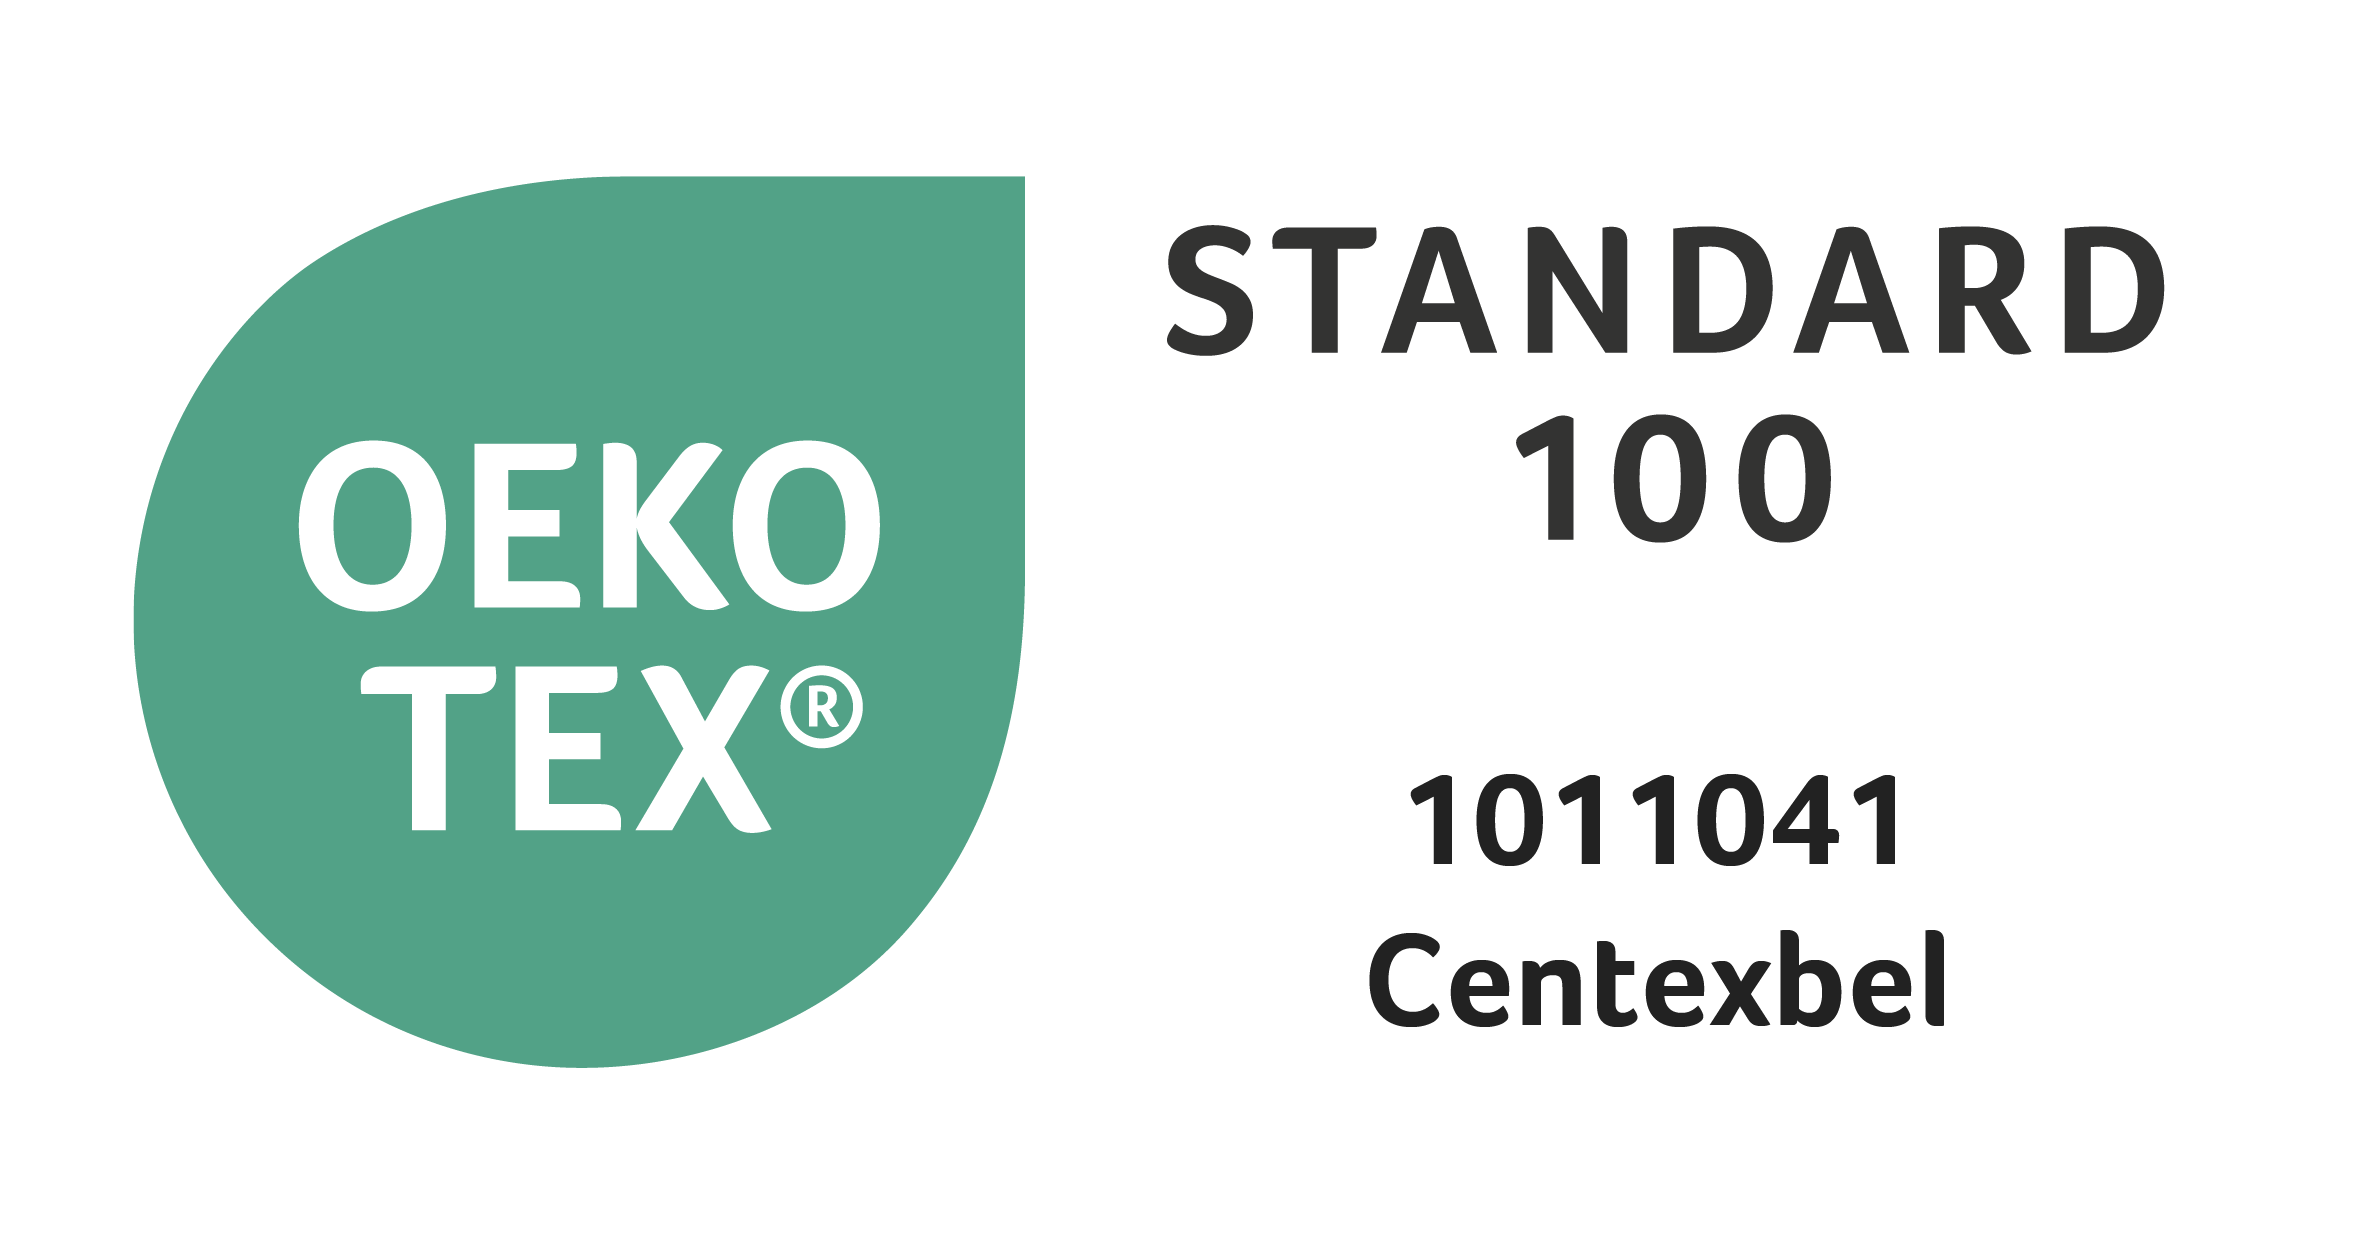 Tested for harmful substances according to Oeko-Tex® Standard 100 (1011041/Centexbel) / Fabric